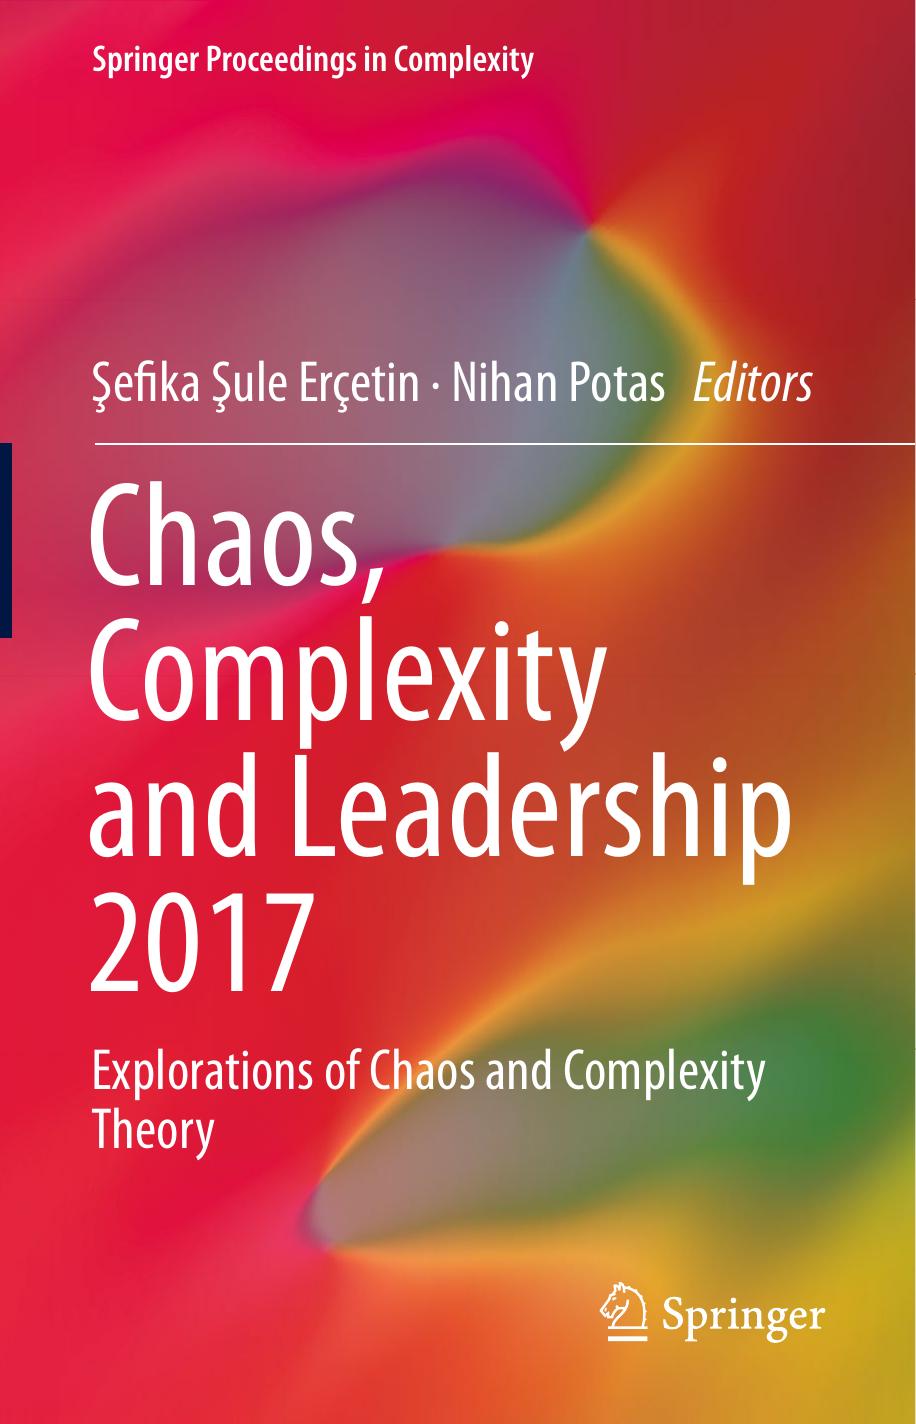 Chaos, Complexity and Leadership 2017  Explorations of Chaos and Complexity Theory 2019